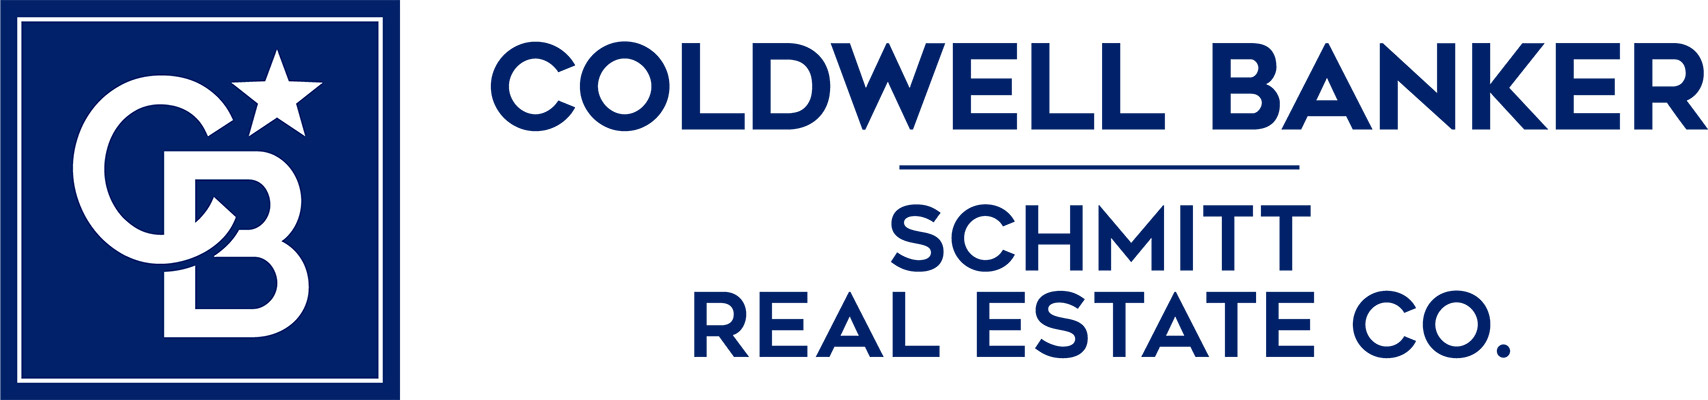 Margo Newman - Coldwell Banker Logo